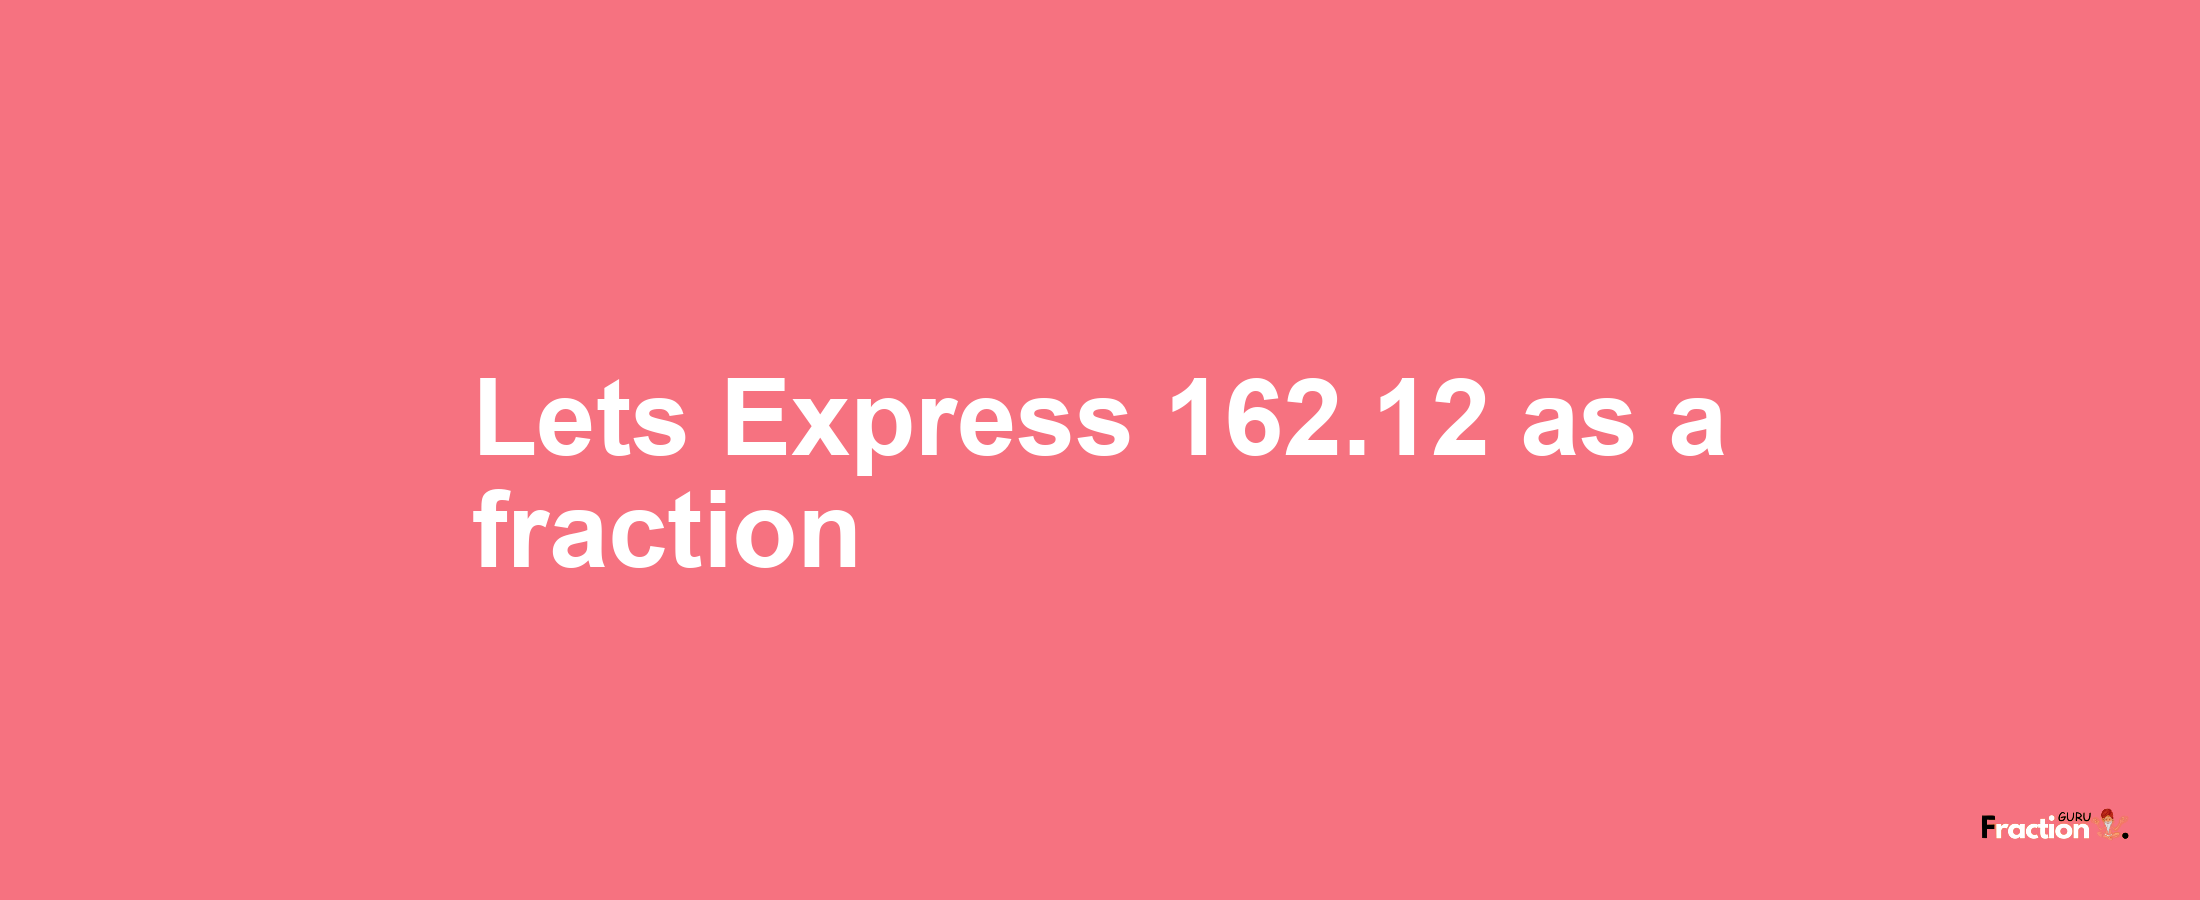 Lets Express 162.12 as afraction